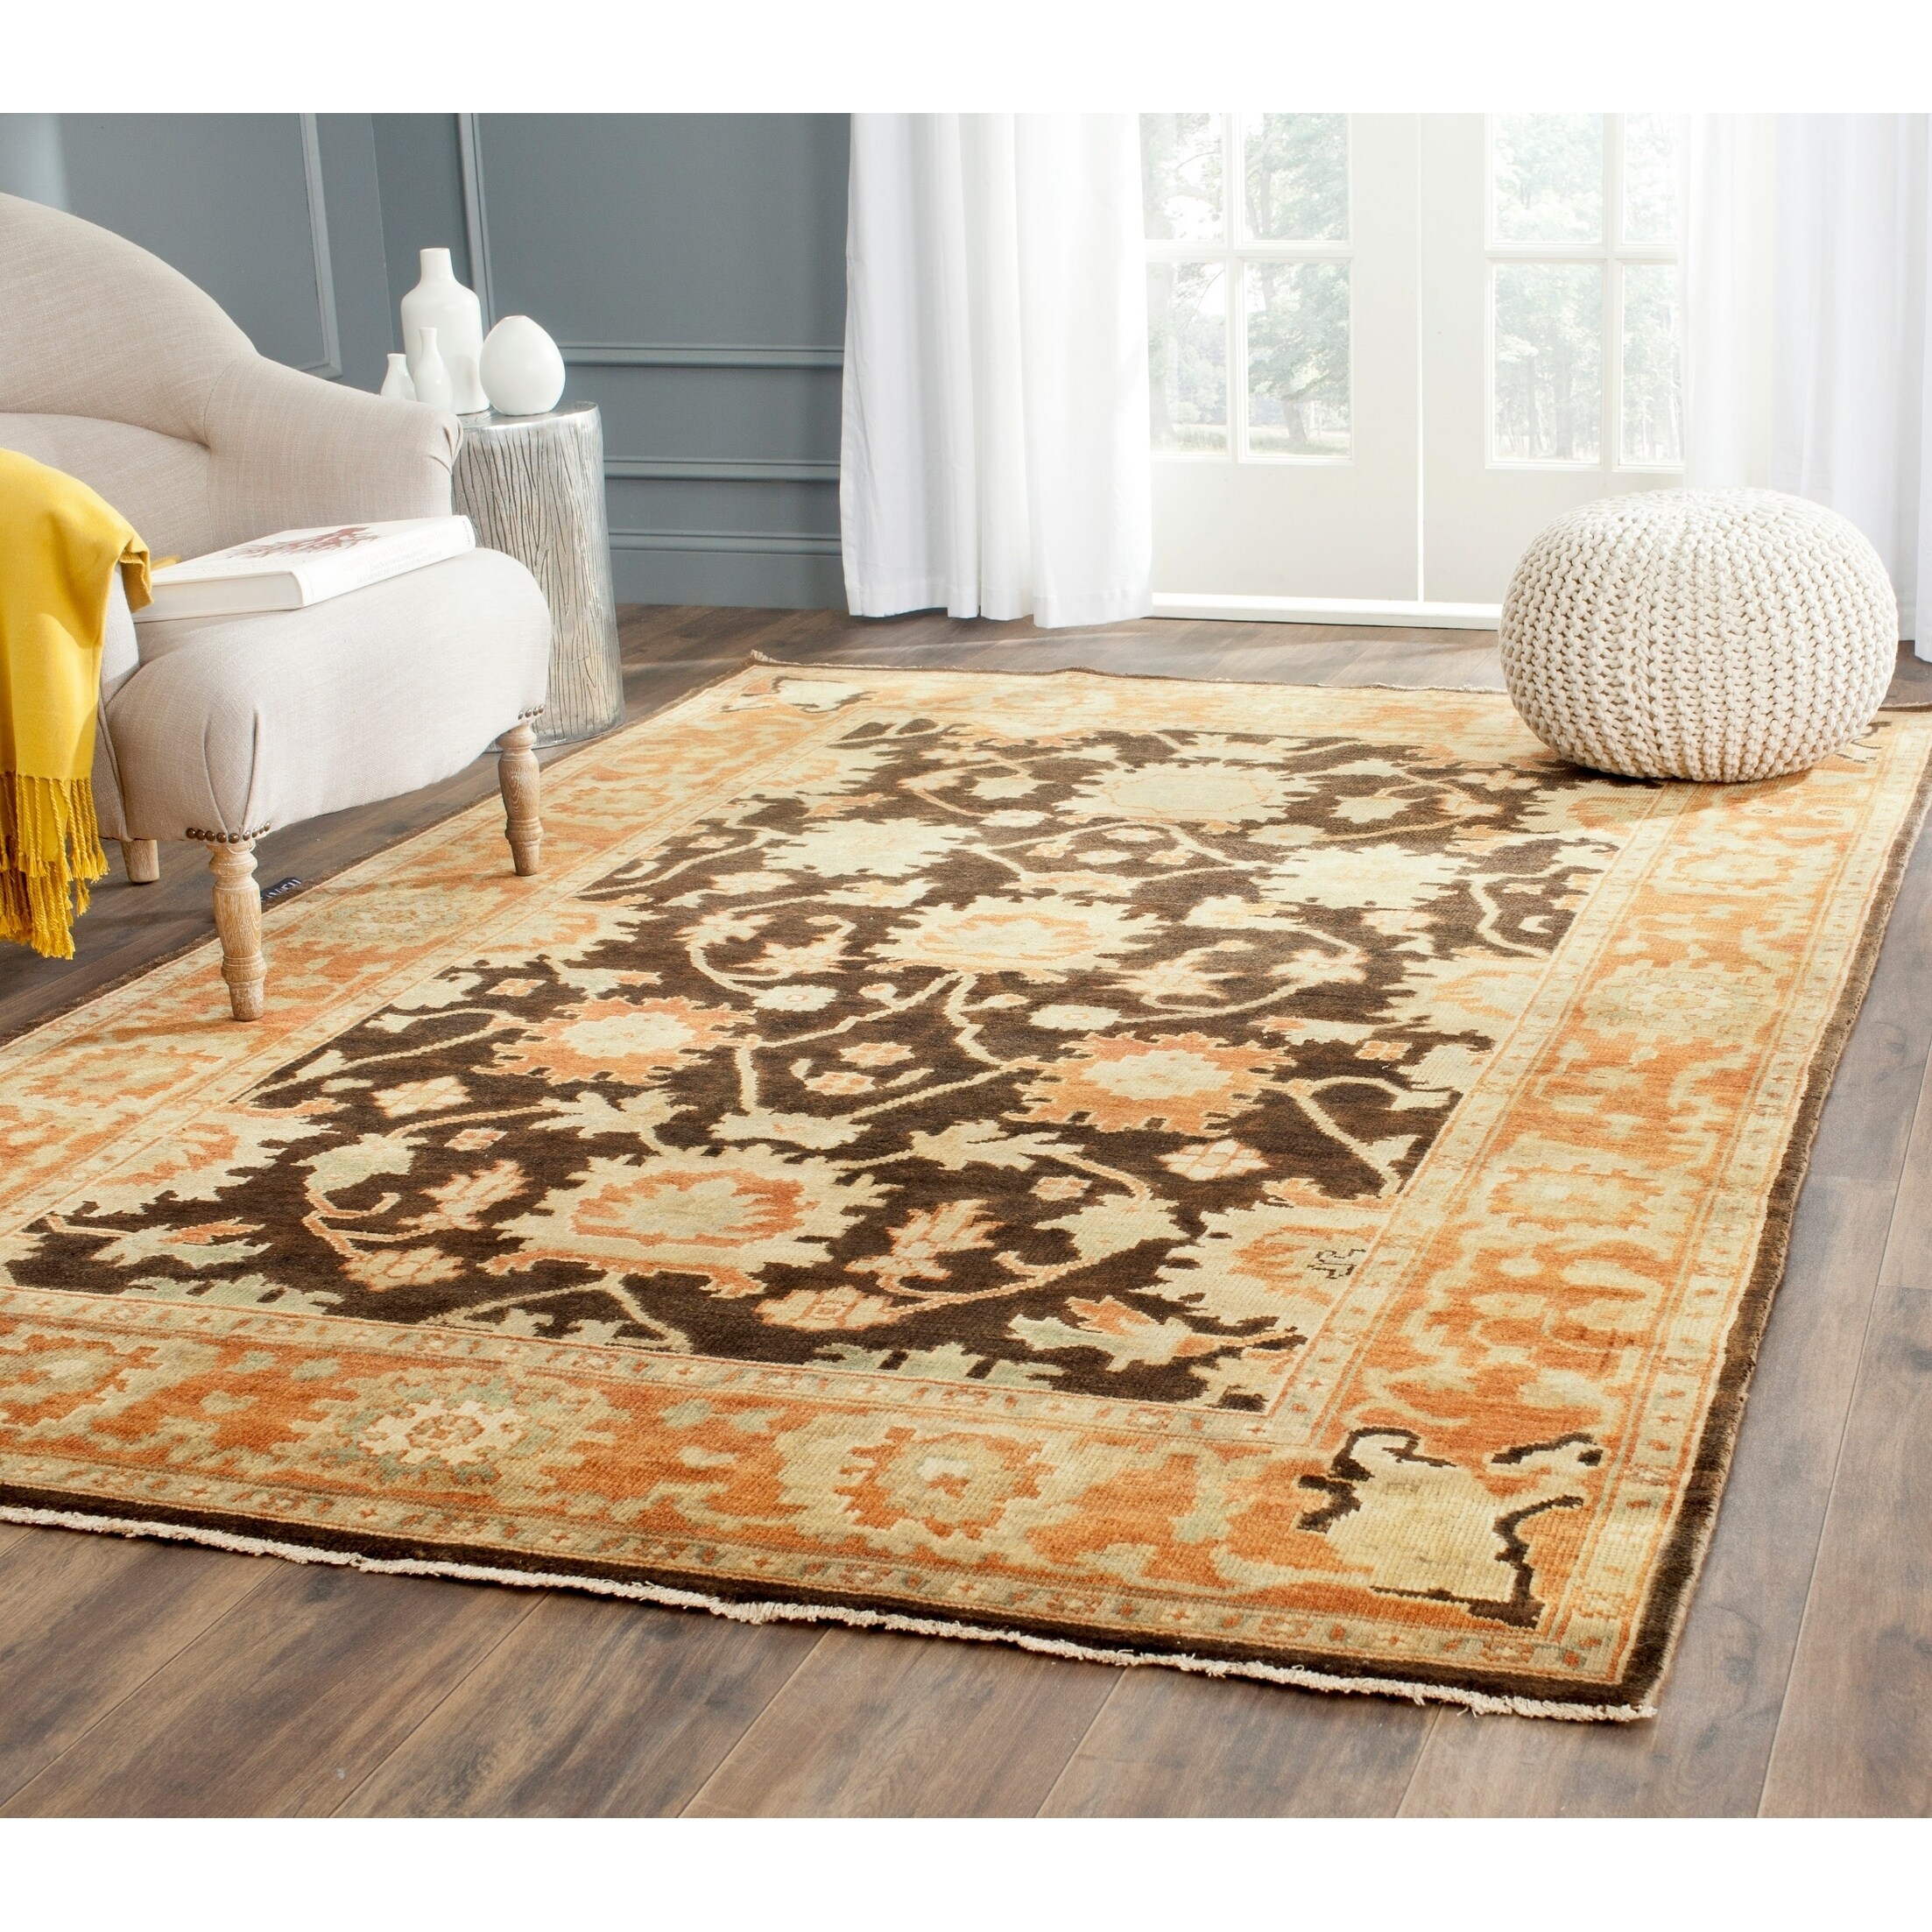 Safavieh Hand knotted Oushak Brown/ Rust Wool Rug (6 X 9)